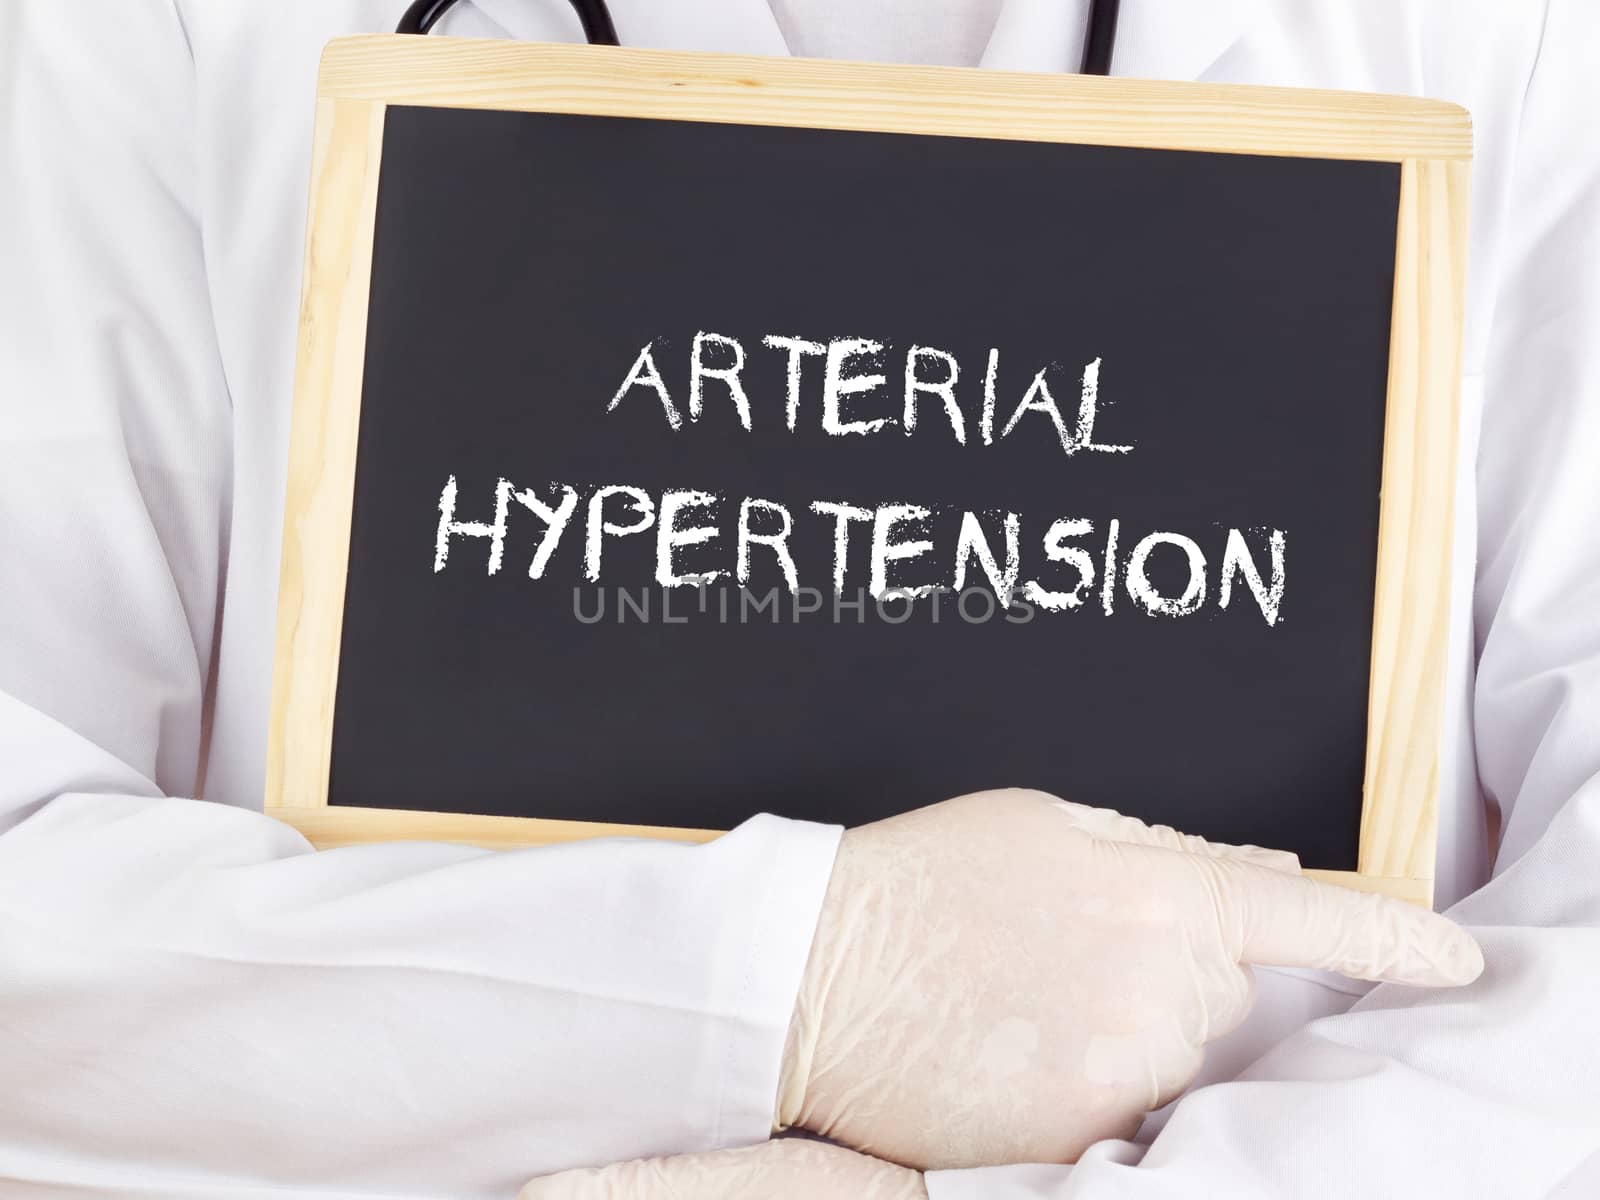 Doctor shows information: arterial hypertension by gwolters